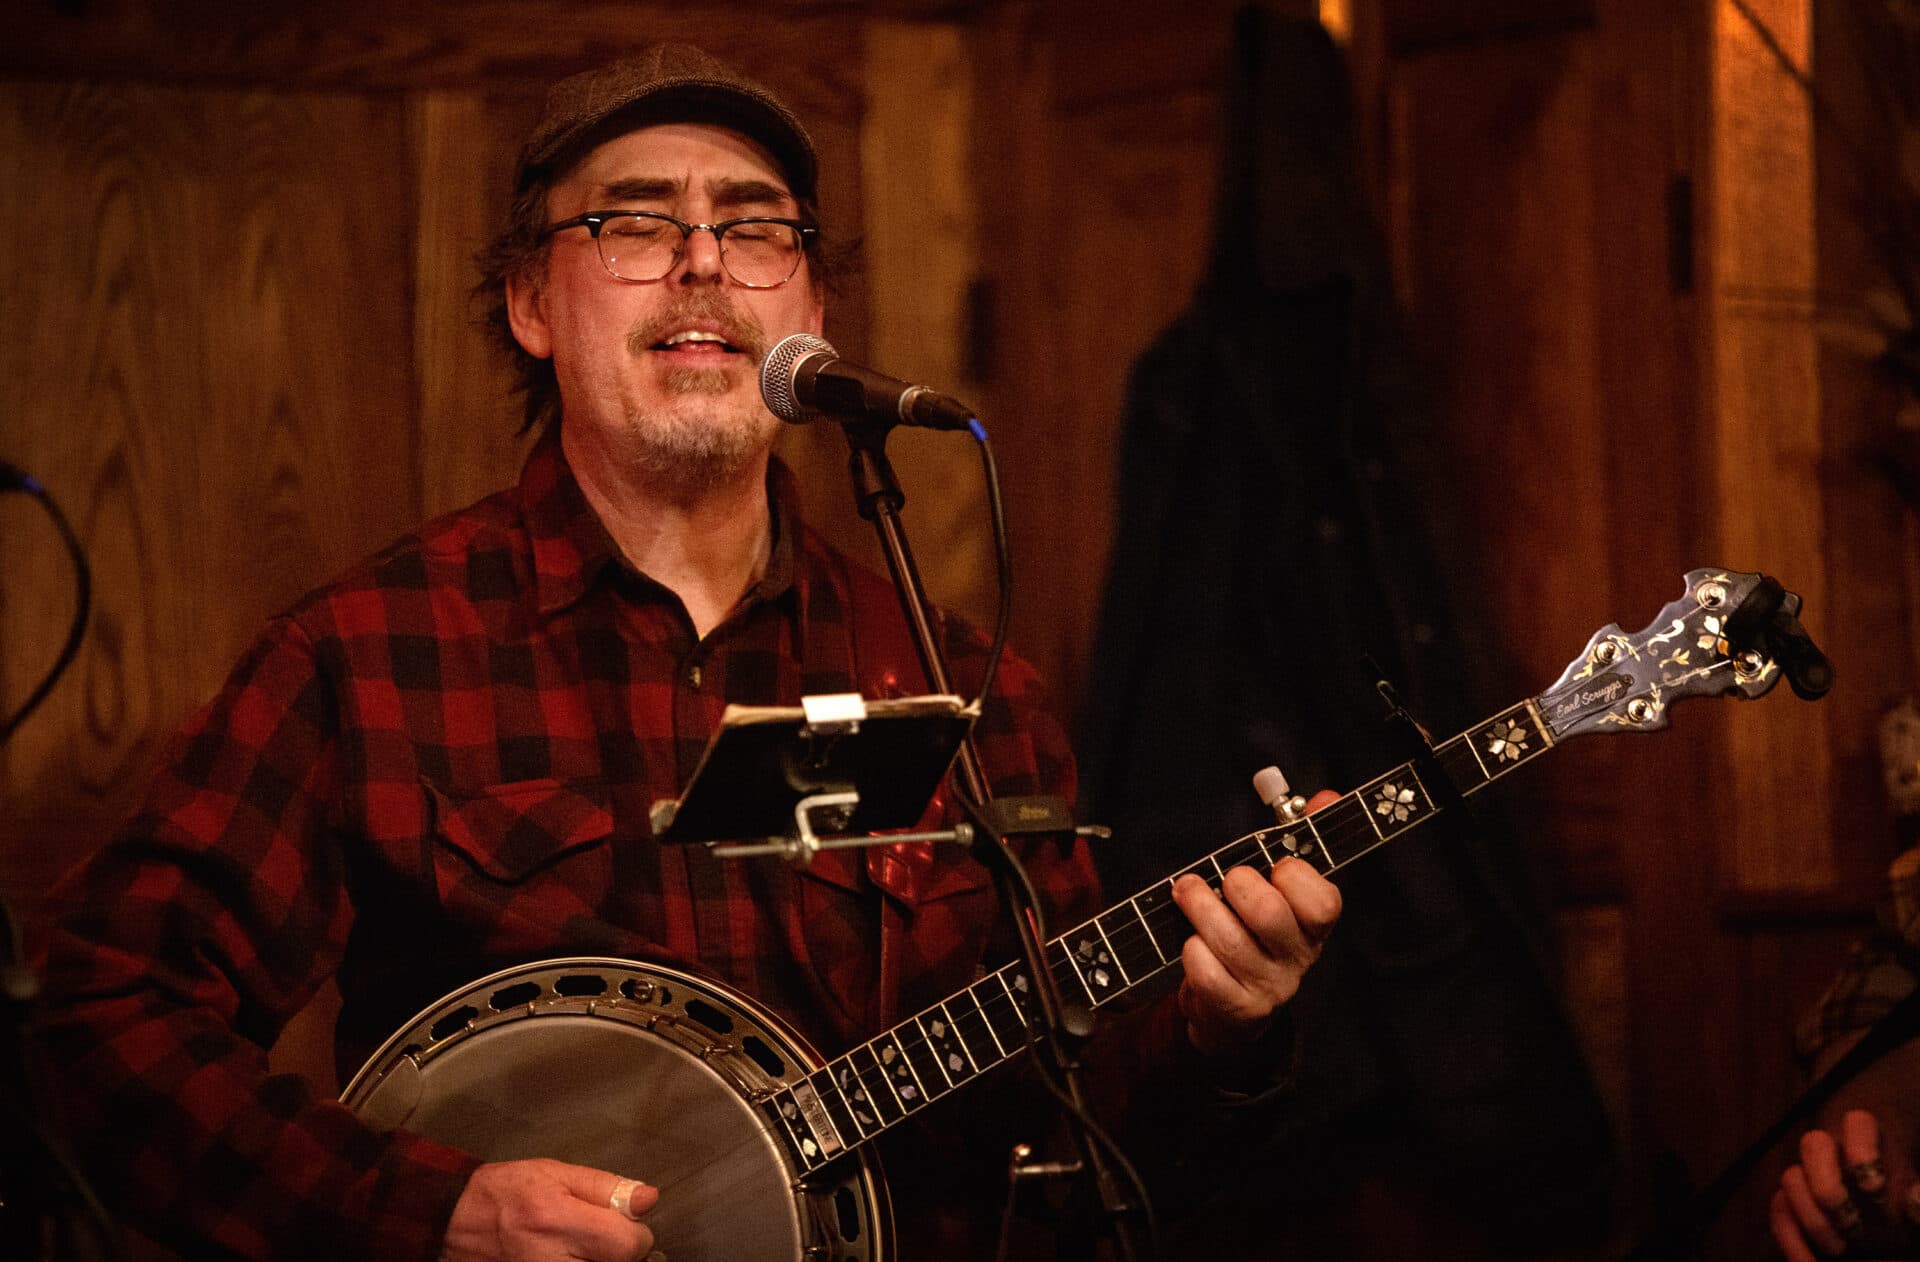 Eric Royer plays banjo as he sings with members of the Royer Family Band at Atwood's on Cambridge Street in Cambridge. (Robin Lubbock/WBUR)